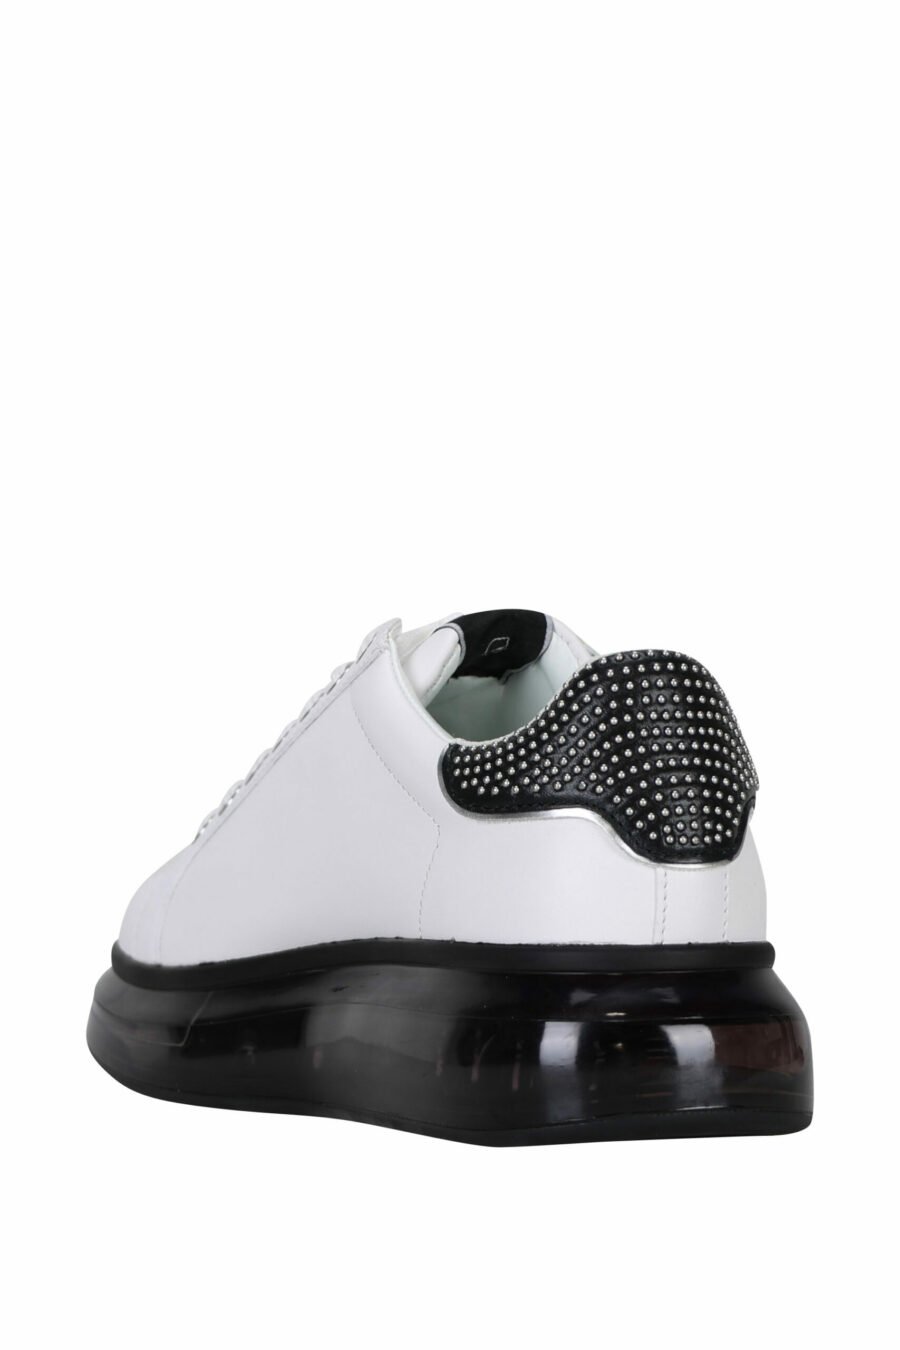 White trainers "kapri fushion" with black sole and logo in outline - 5059529363467 3 scaled